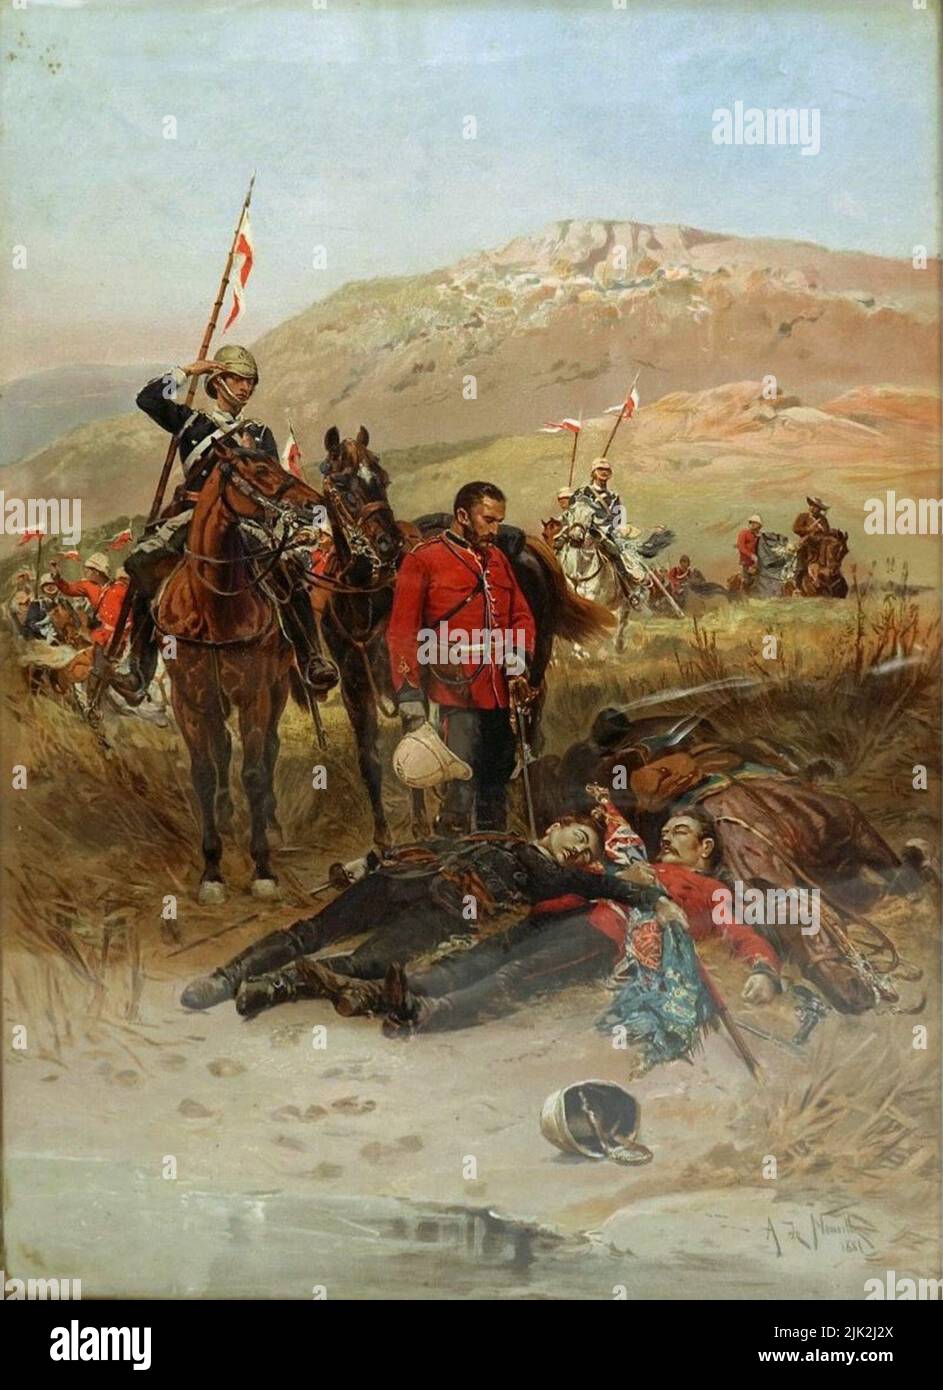 The Last Sleep of the Brave, by Alphonse de Neuville. Lieutenant Teignmouth Melvill and Lieutenant Nevill Josiah Aylmer Coghill  were both killed attempting to save the Queen's Colour of the 1st Battalion at the Battle of Isandlwana on 22 January 1879. Stock Photo